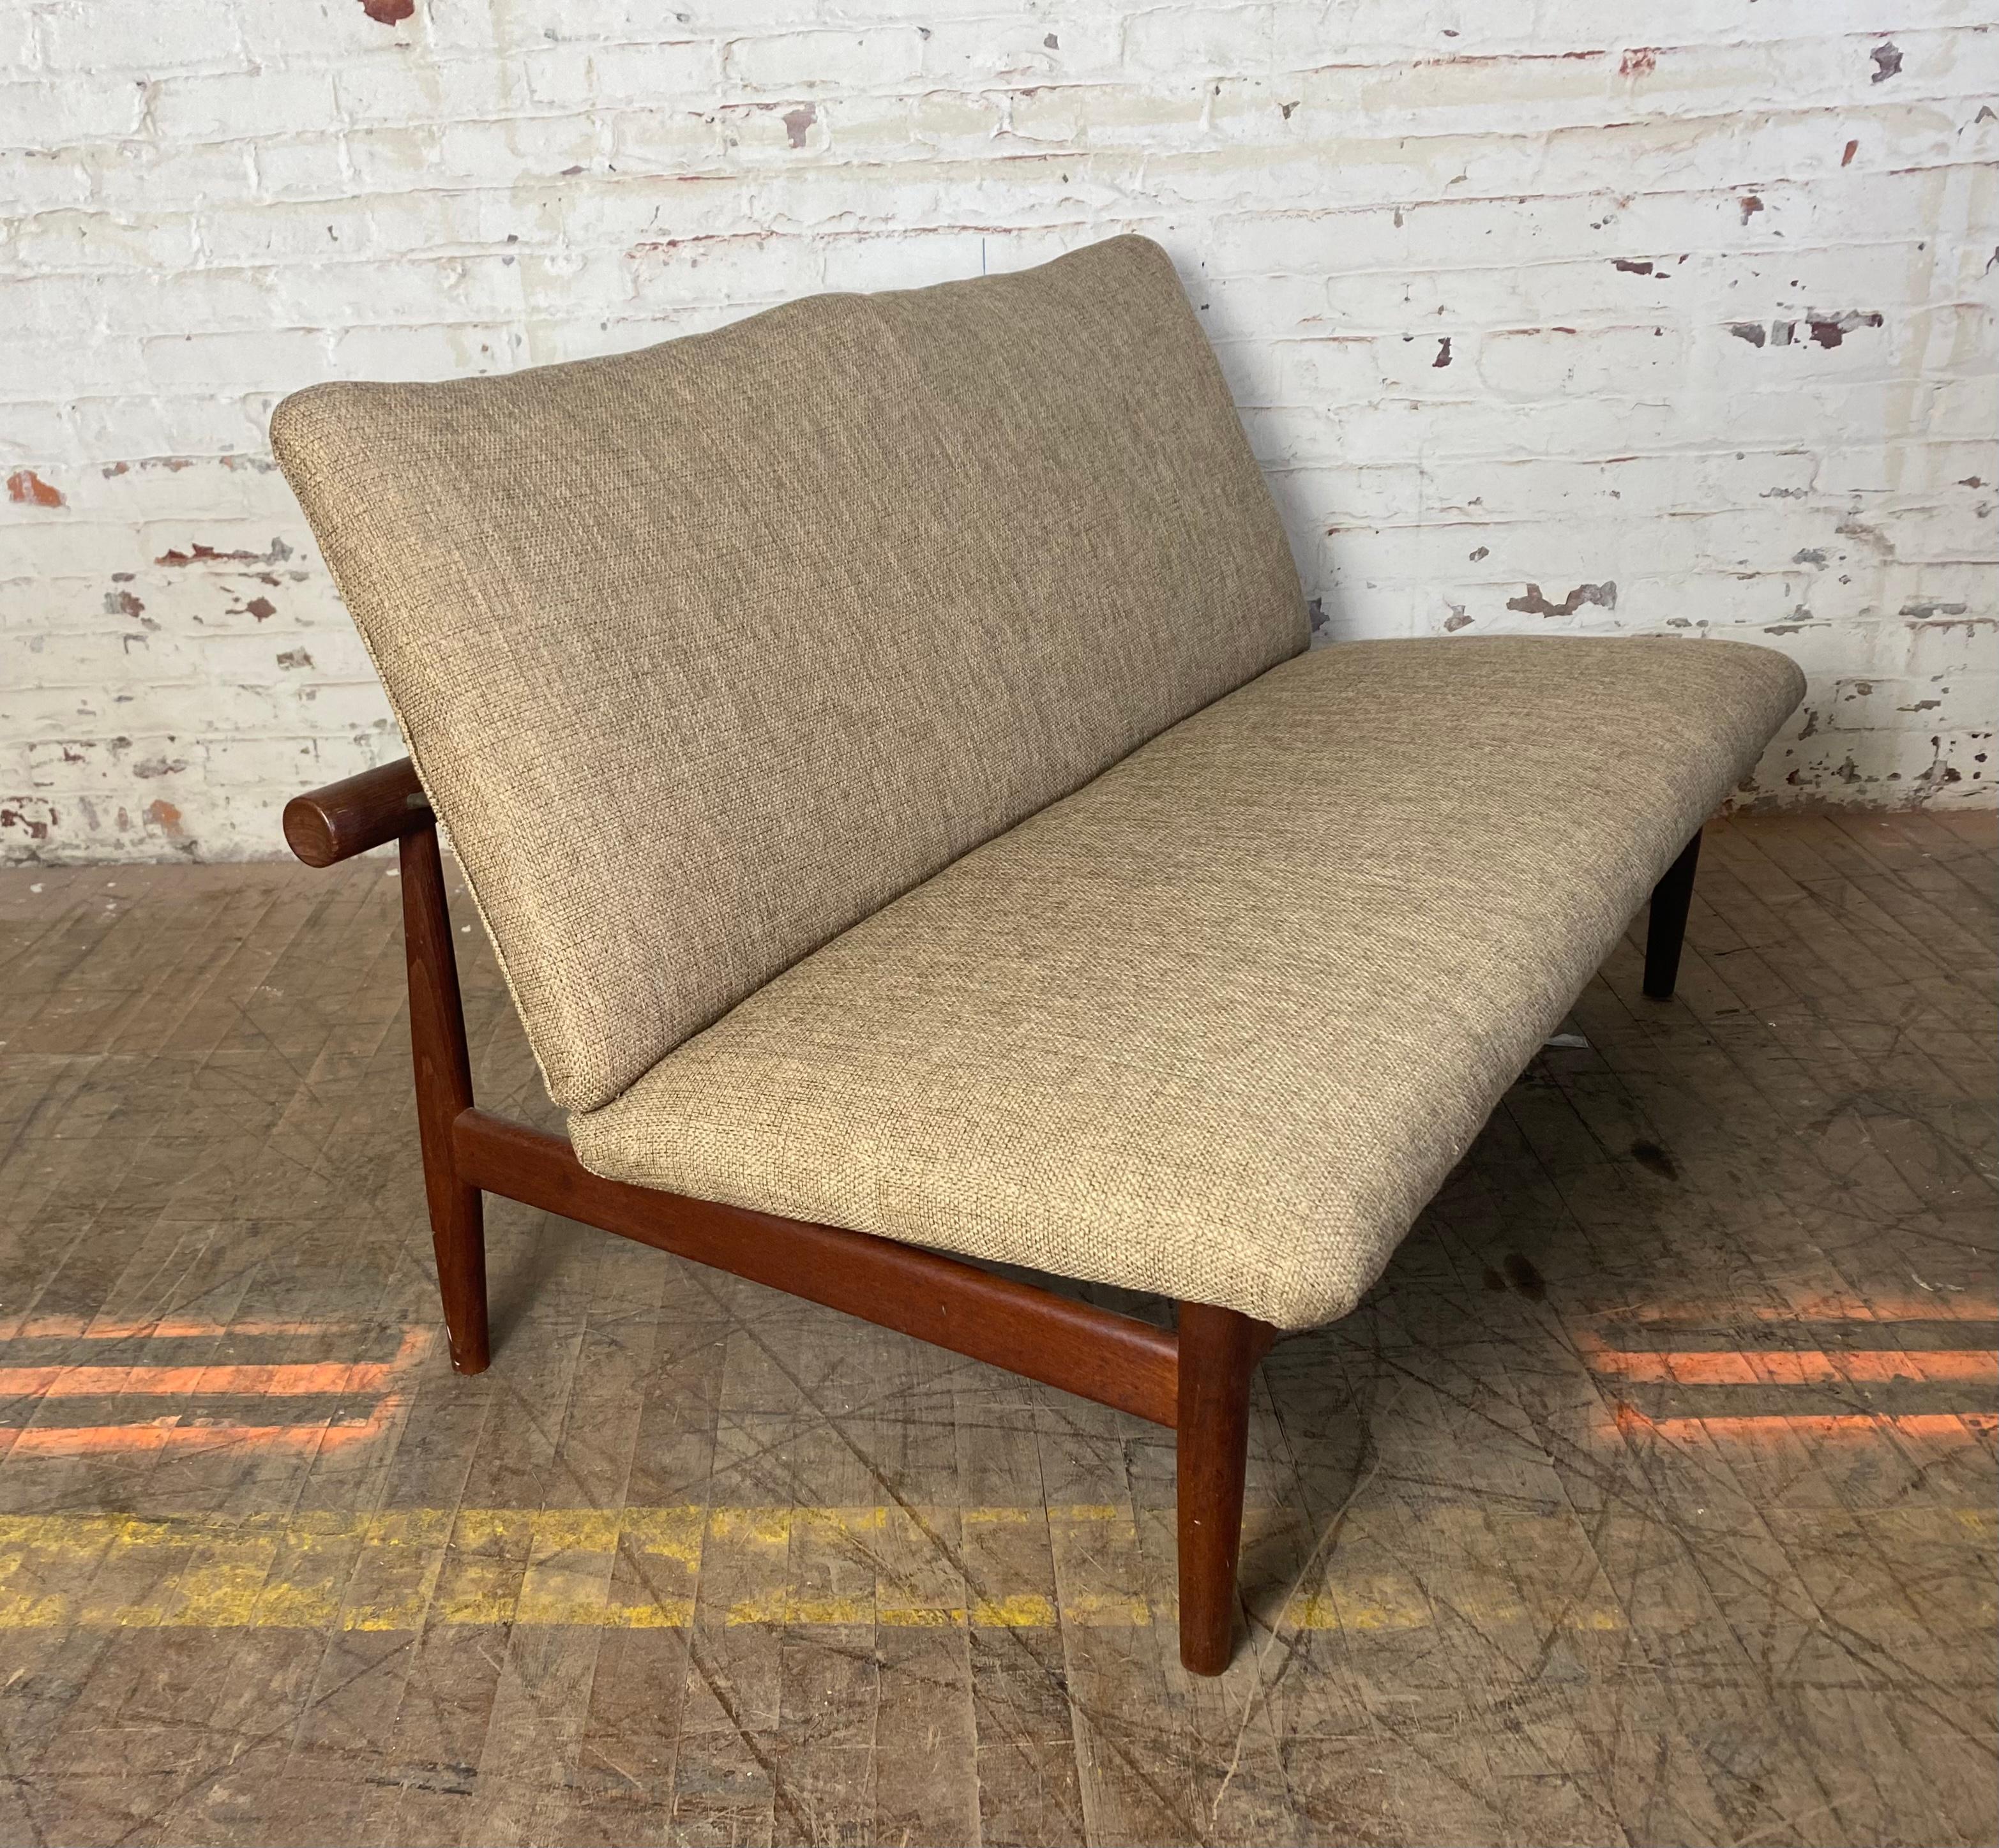 Finn Juhl Japan Series Two-Seater Sofa,, Early label ,original fabric / Denmark.. excellent original condition,, Retains its original fabric as well as early button tag / label.. extremely comfortable,, Classic design and styling,,, Hand delivery